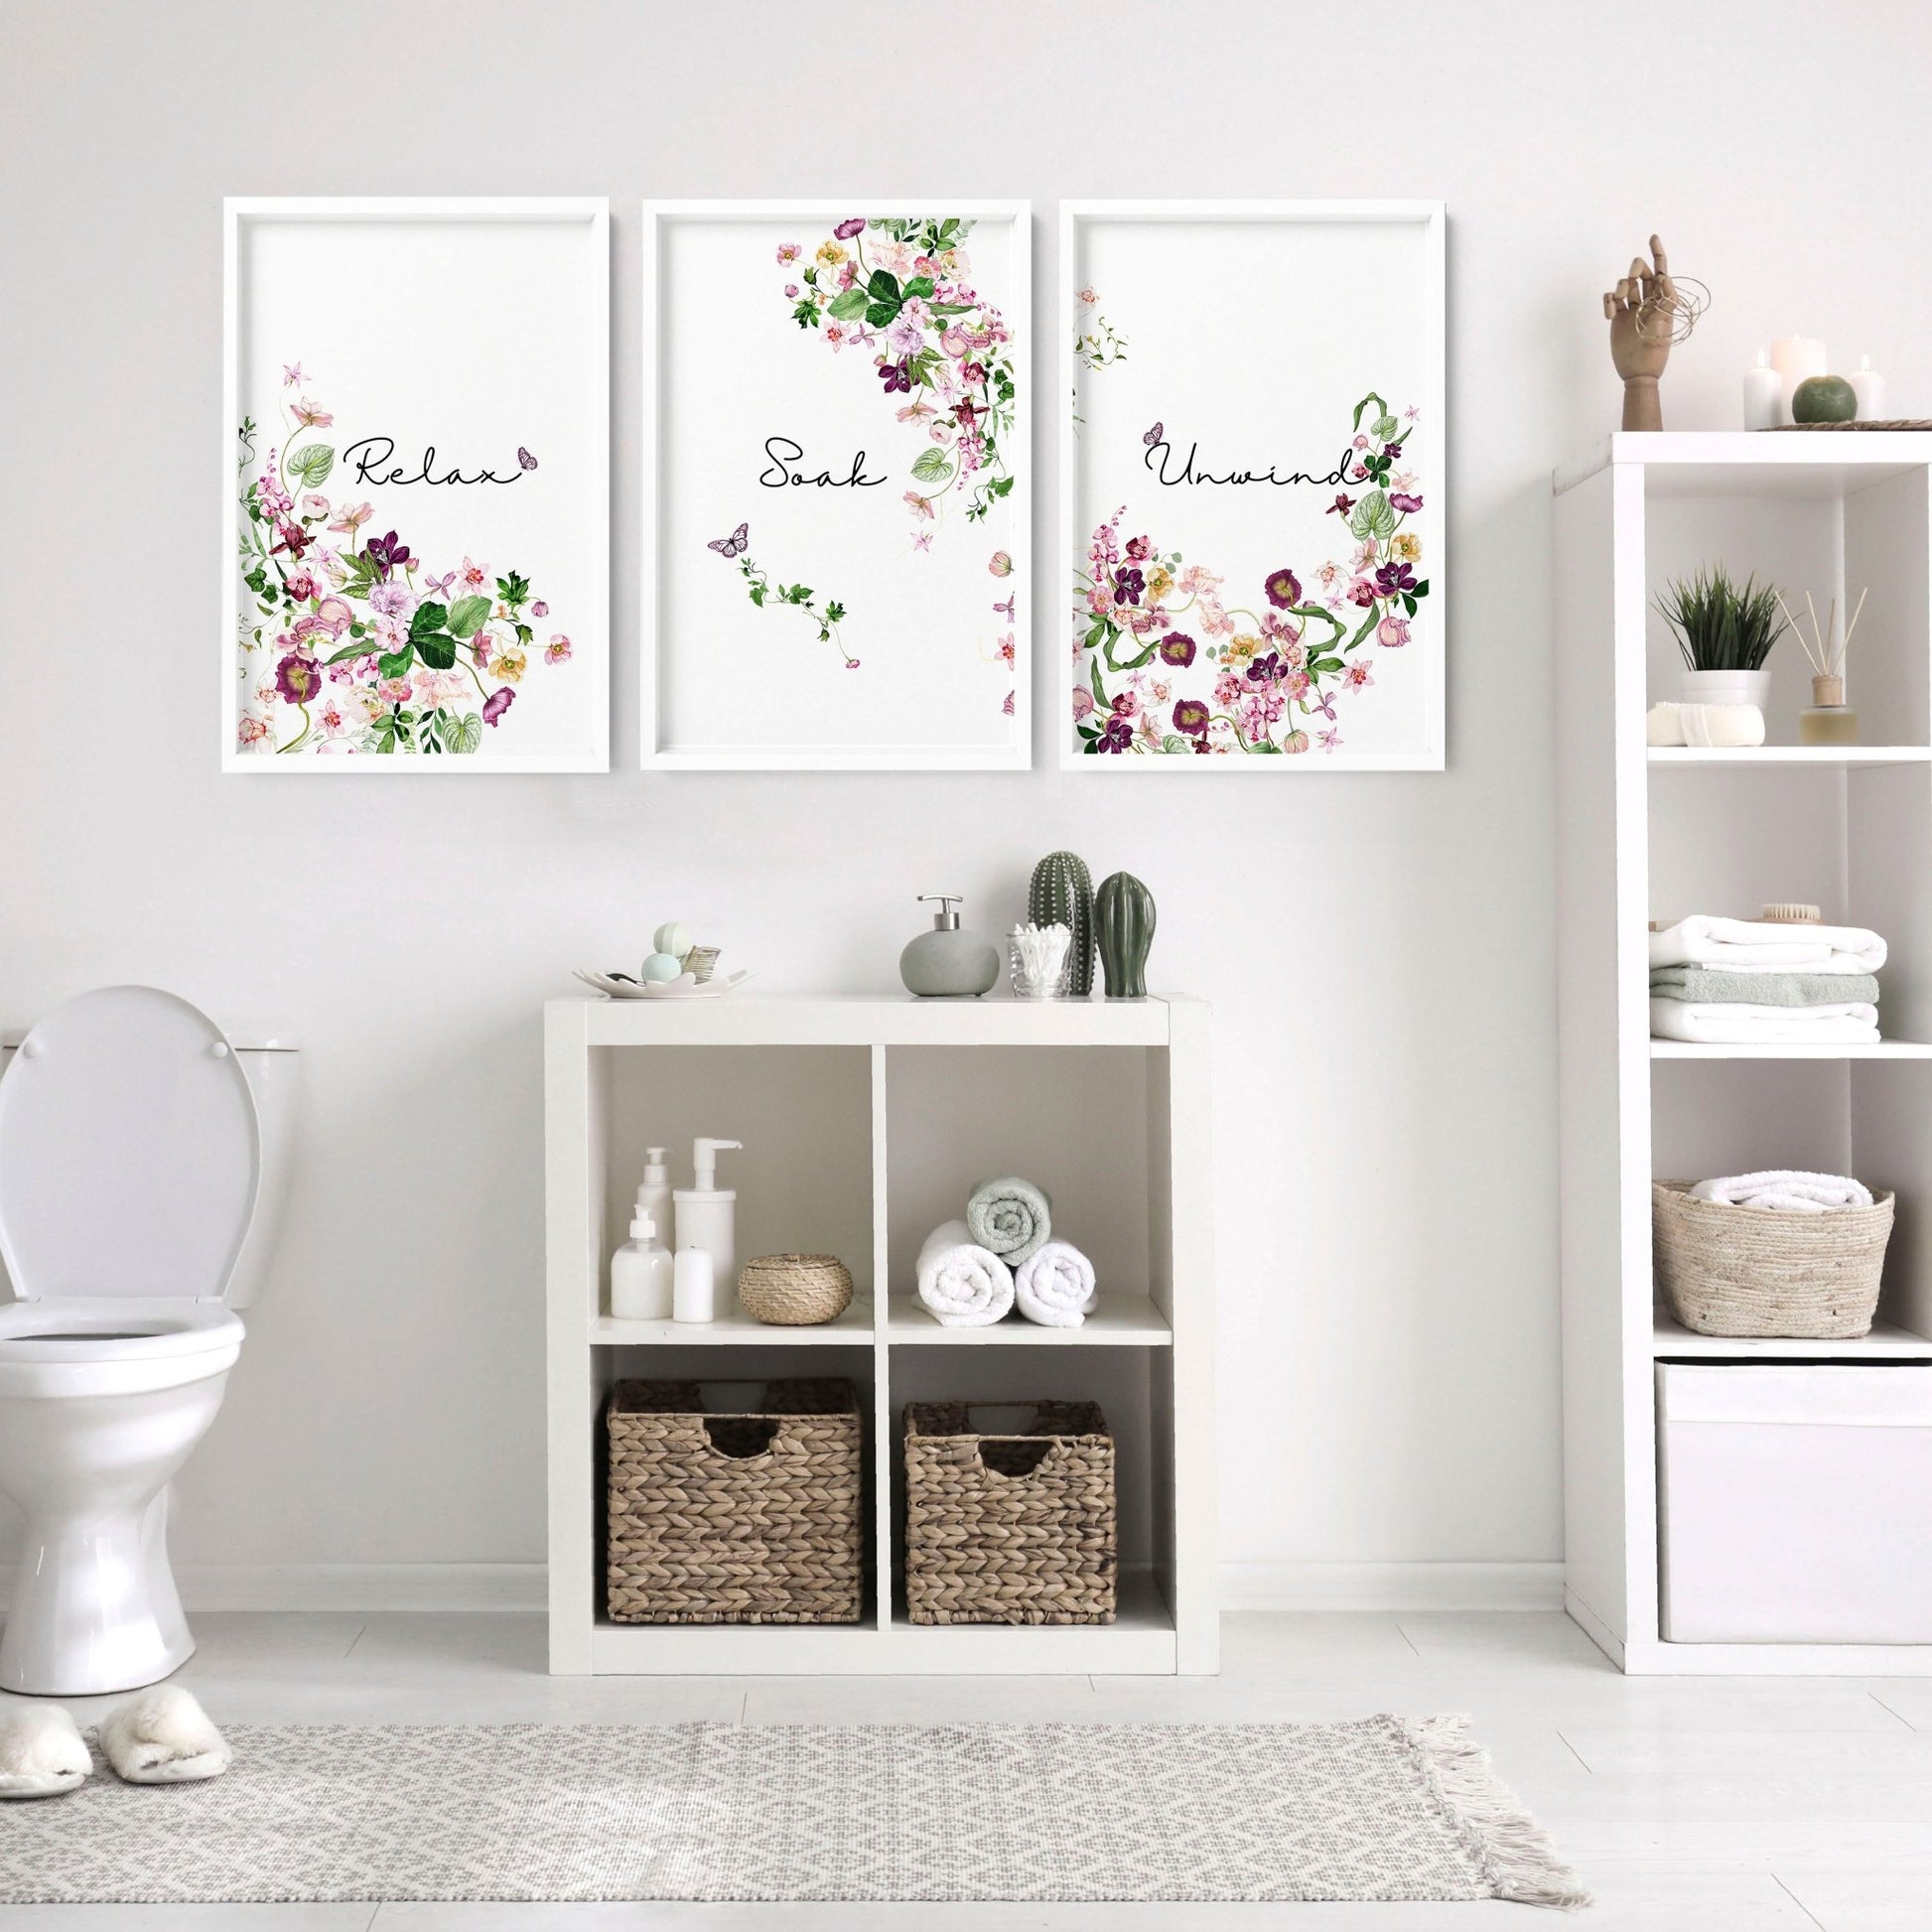 French country bathrooms Set of 3 wall art - About Wall Art